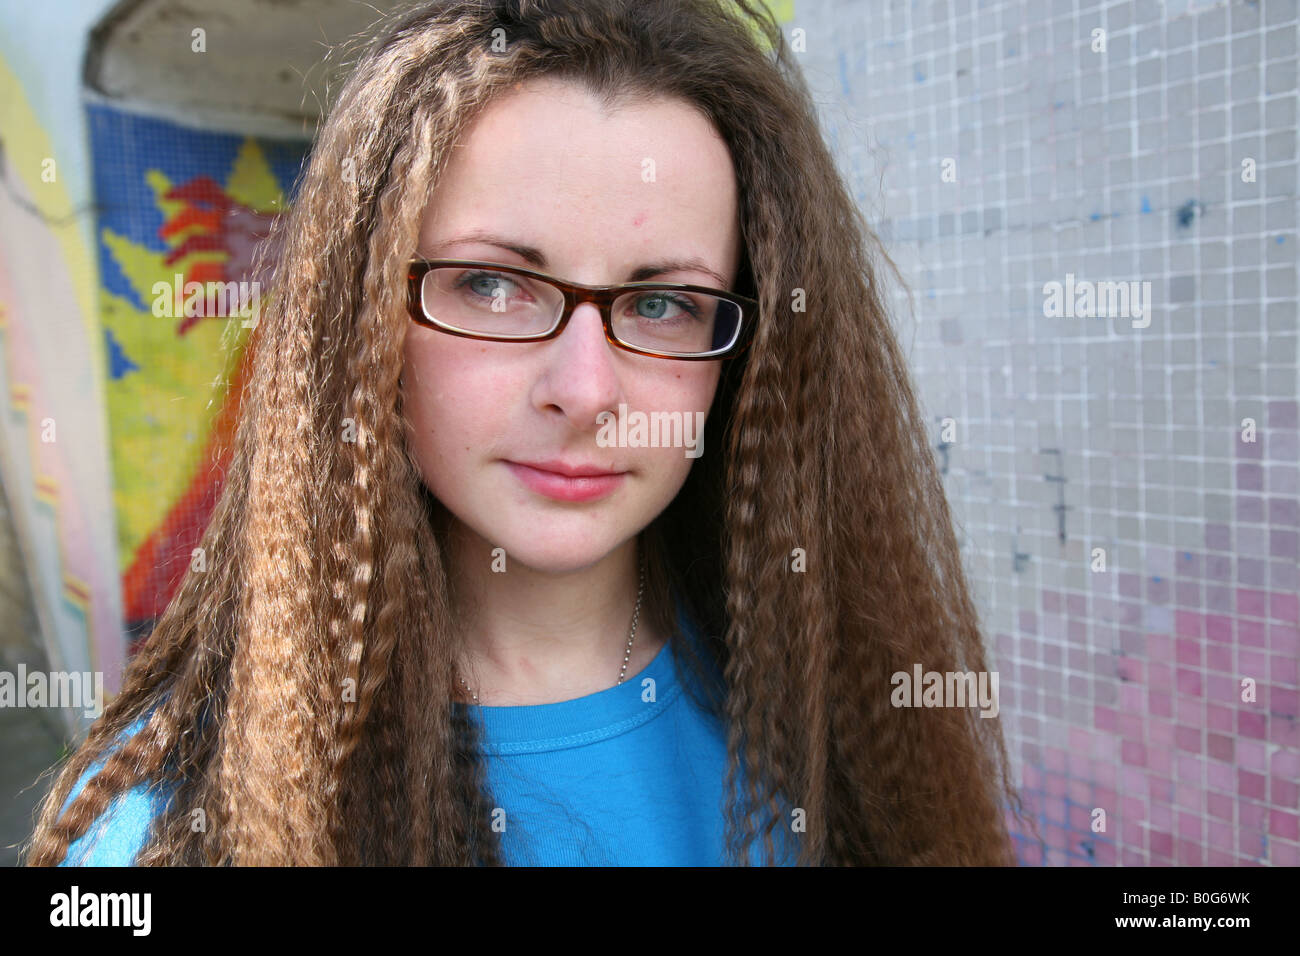 Caucasian female teenage student looking for trouble taken outside in a graffiti covered underpass on a council estate Stock Photo